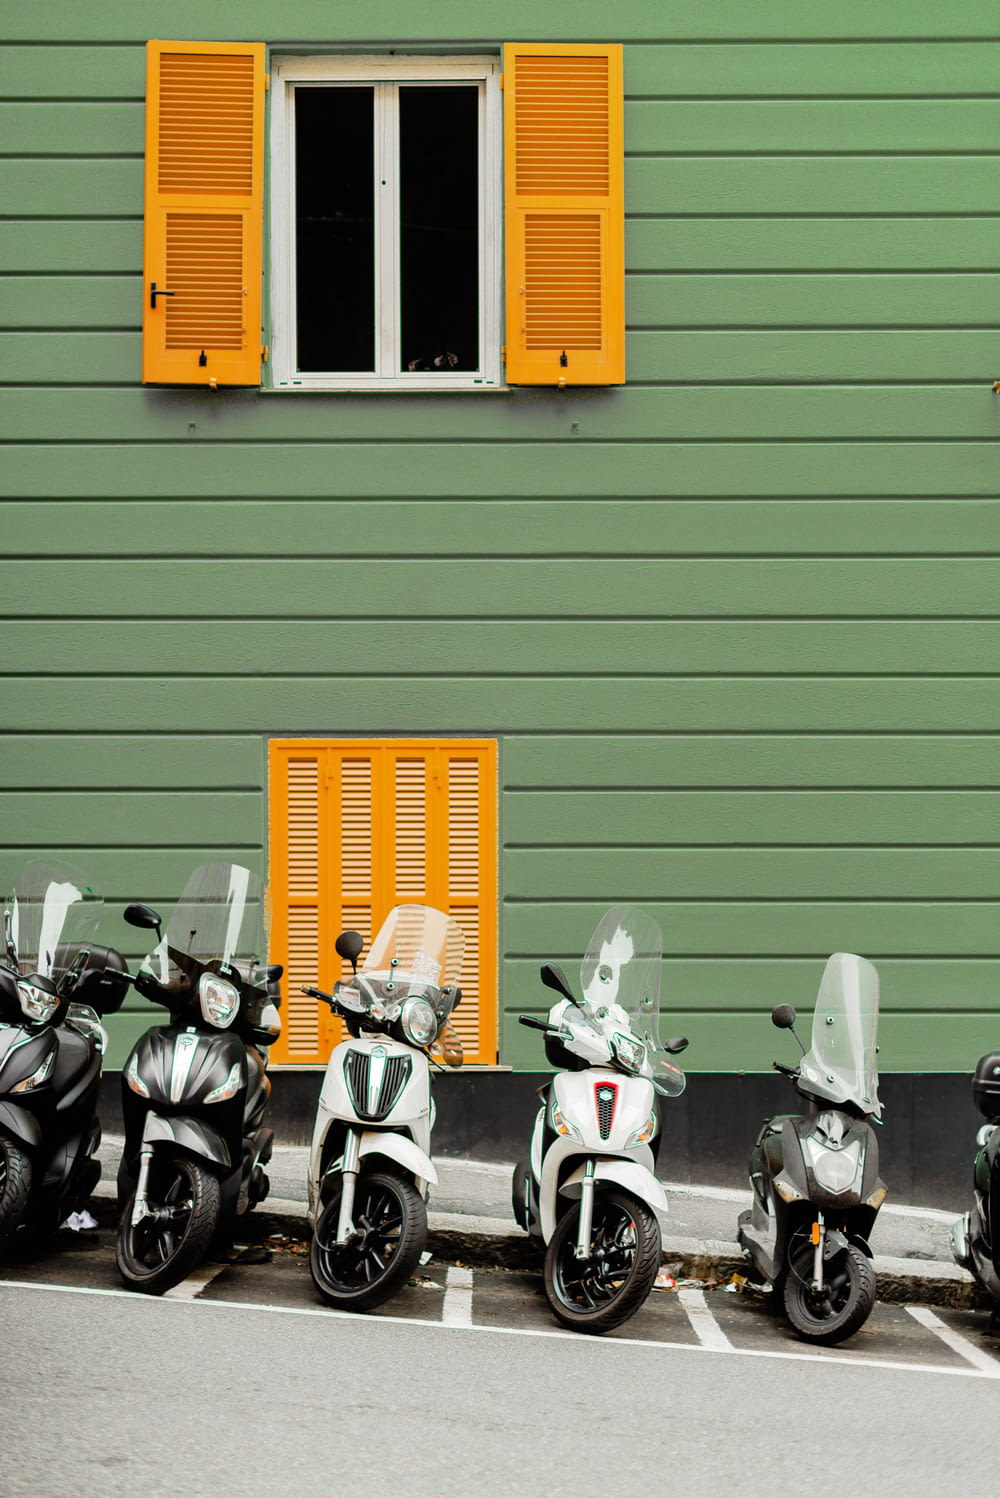 a row of motorcycles parked in front of a green building